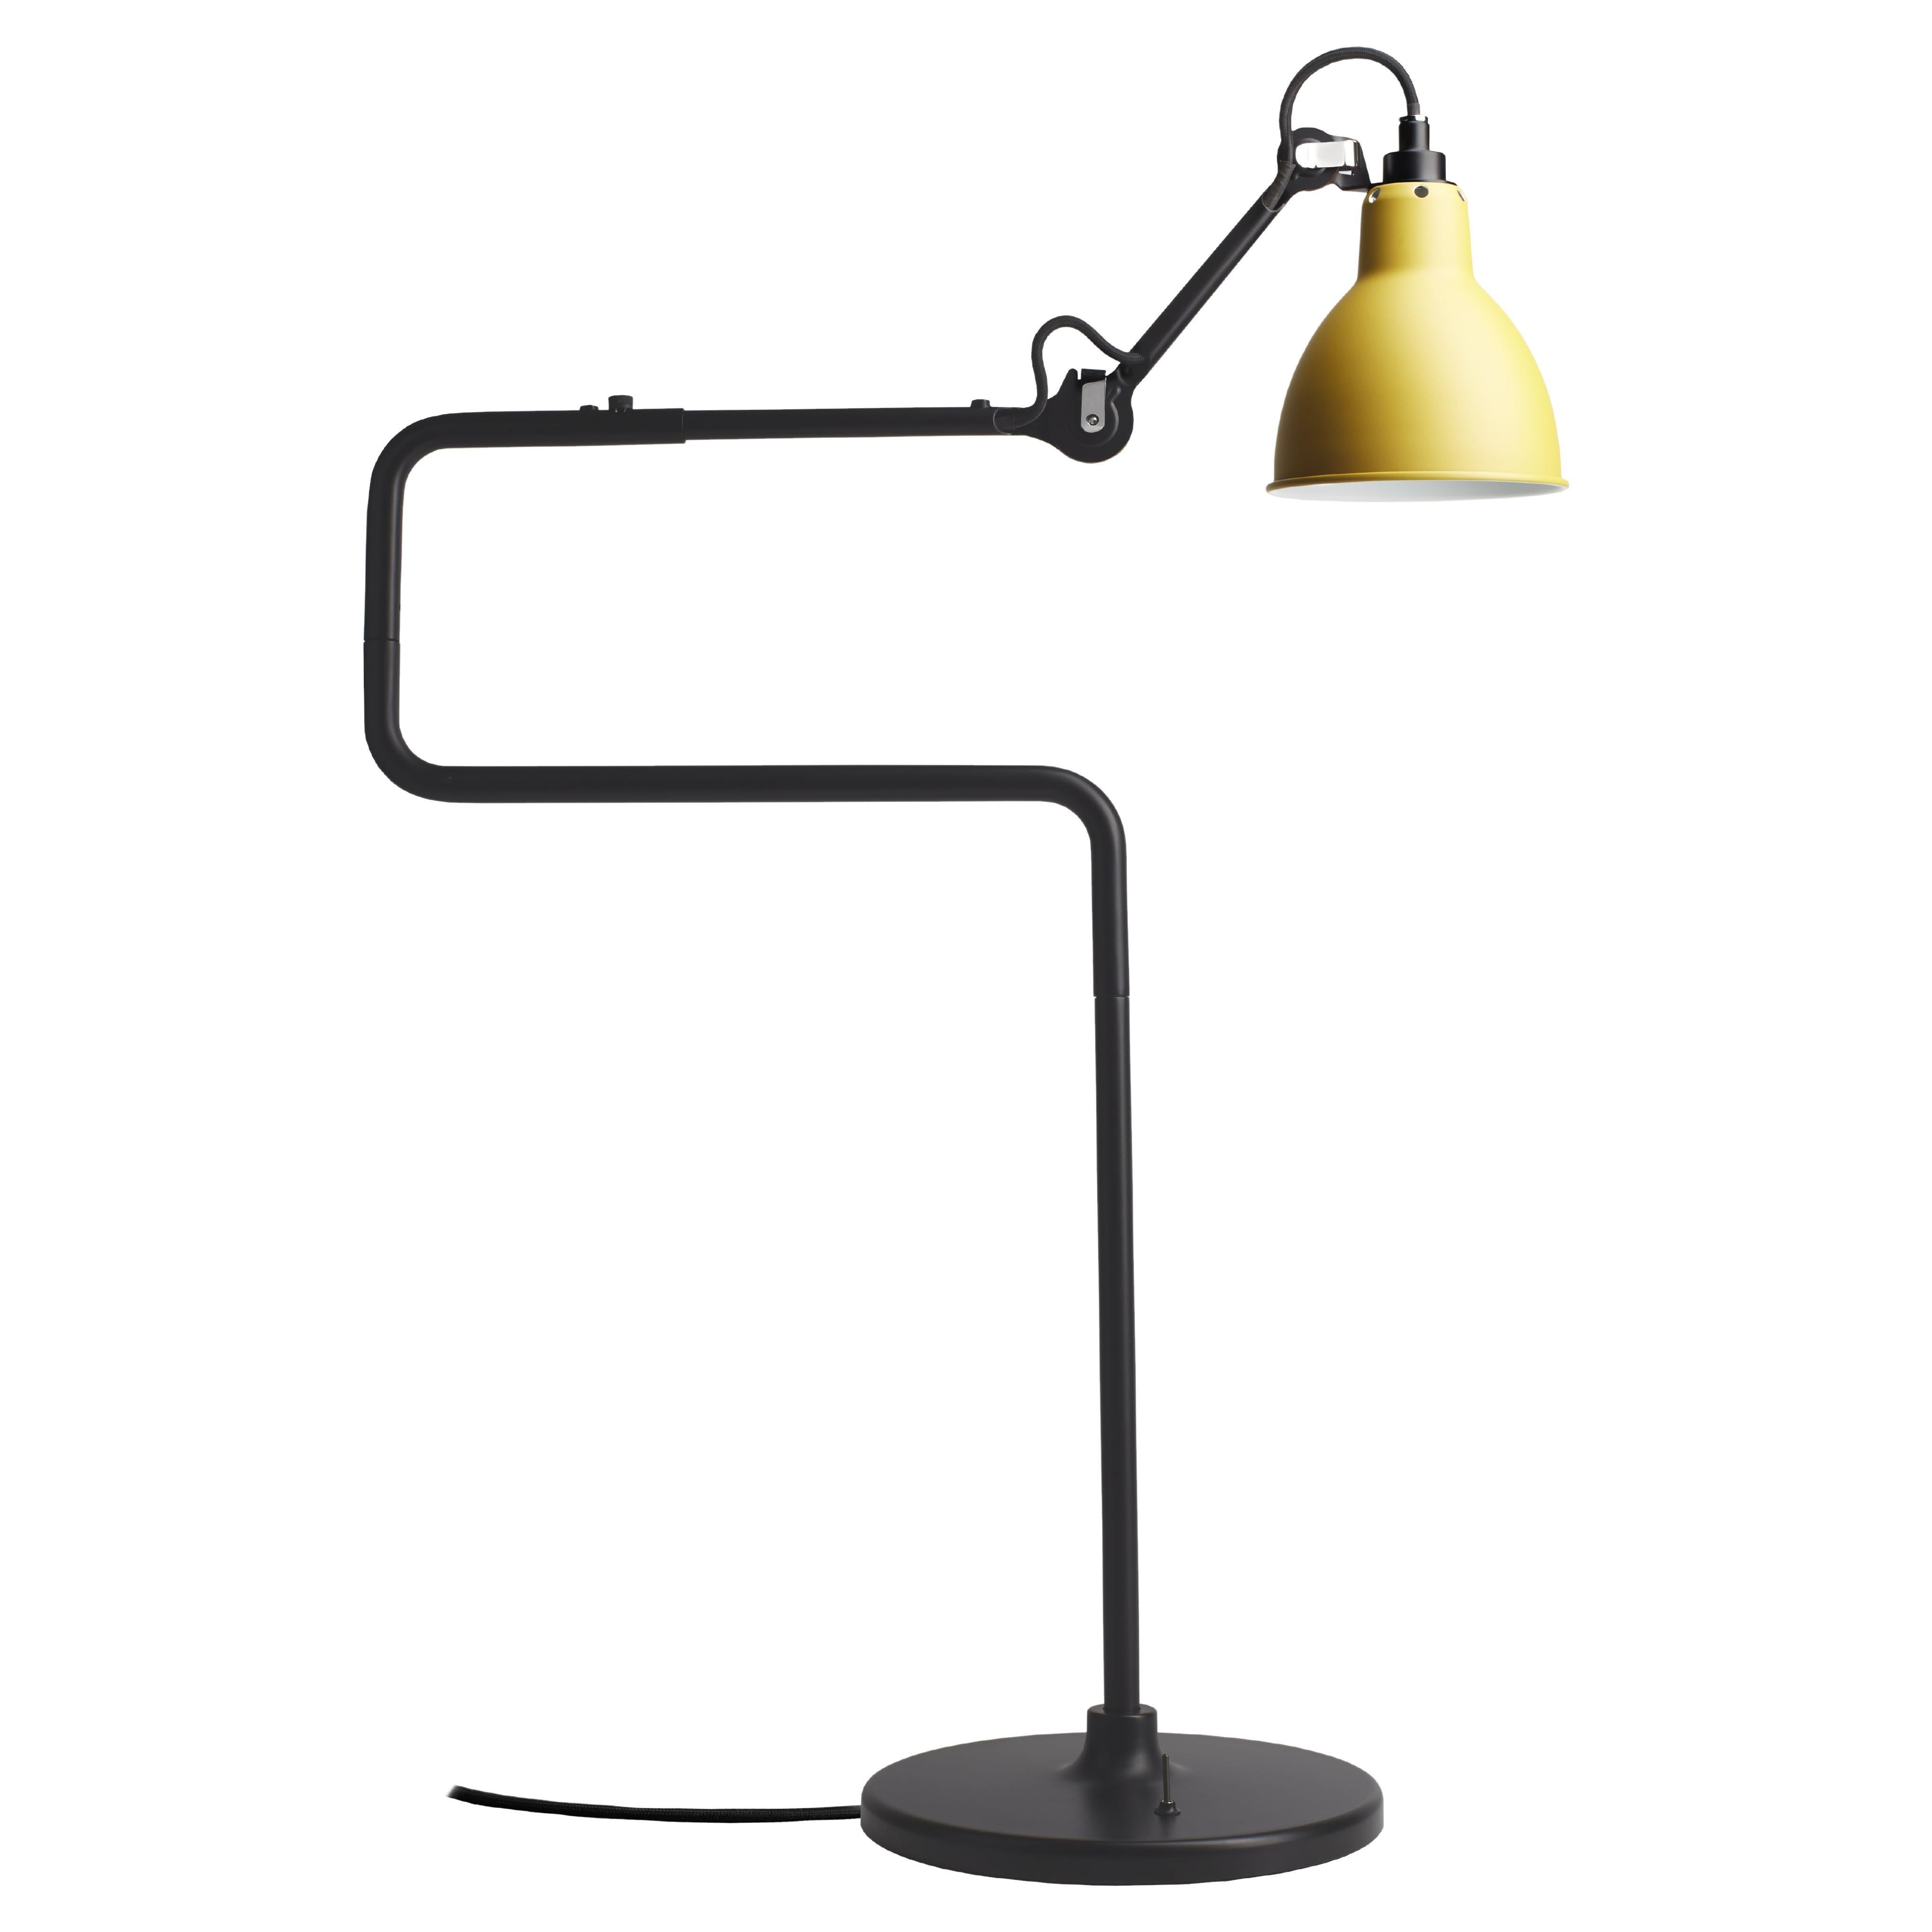 DCW Editions La Lampe Gras N°317 Table Lamp in Black Arm with Yellow Shade